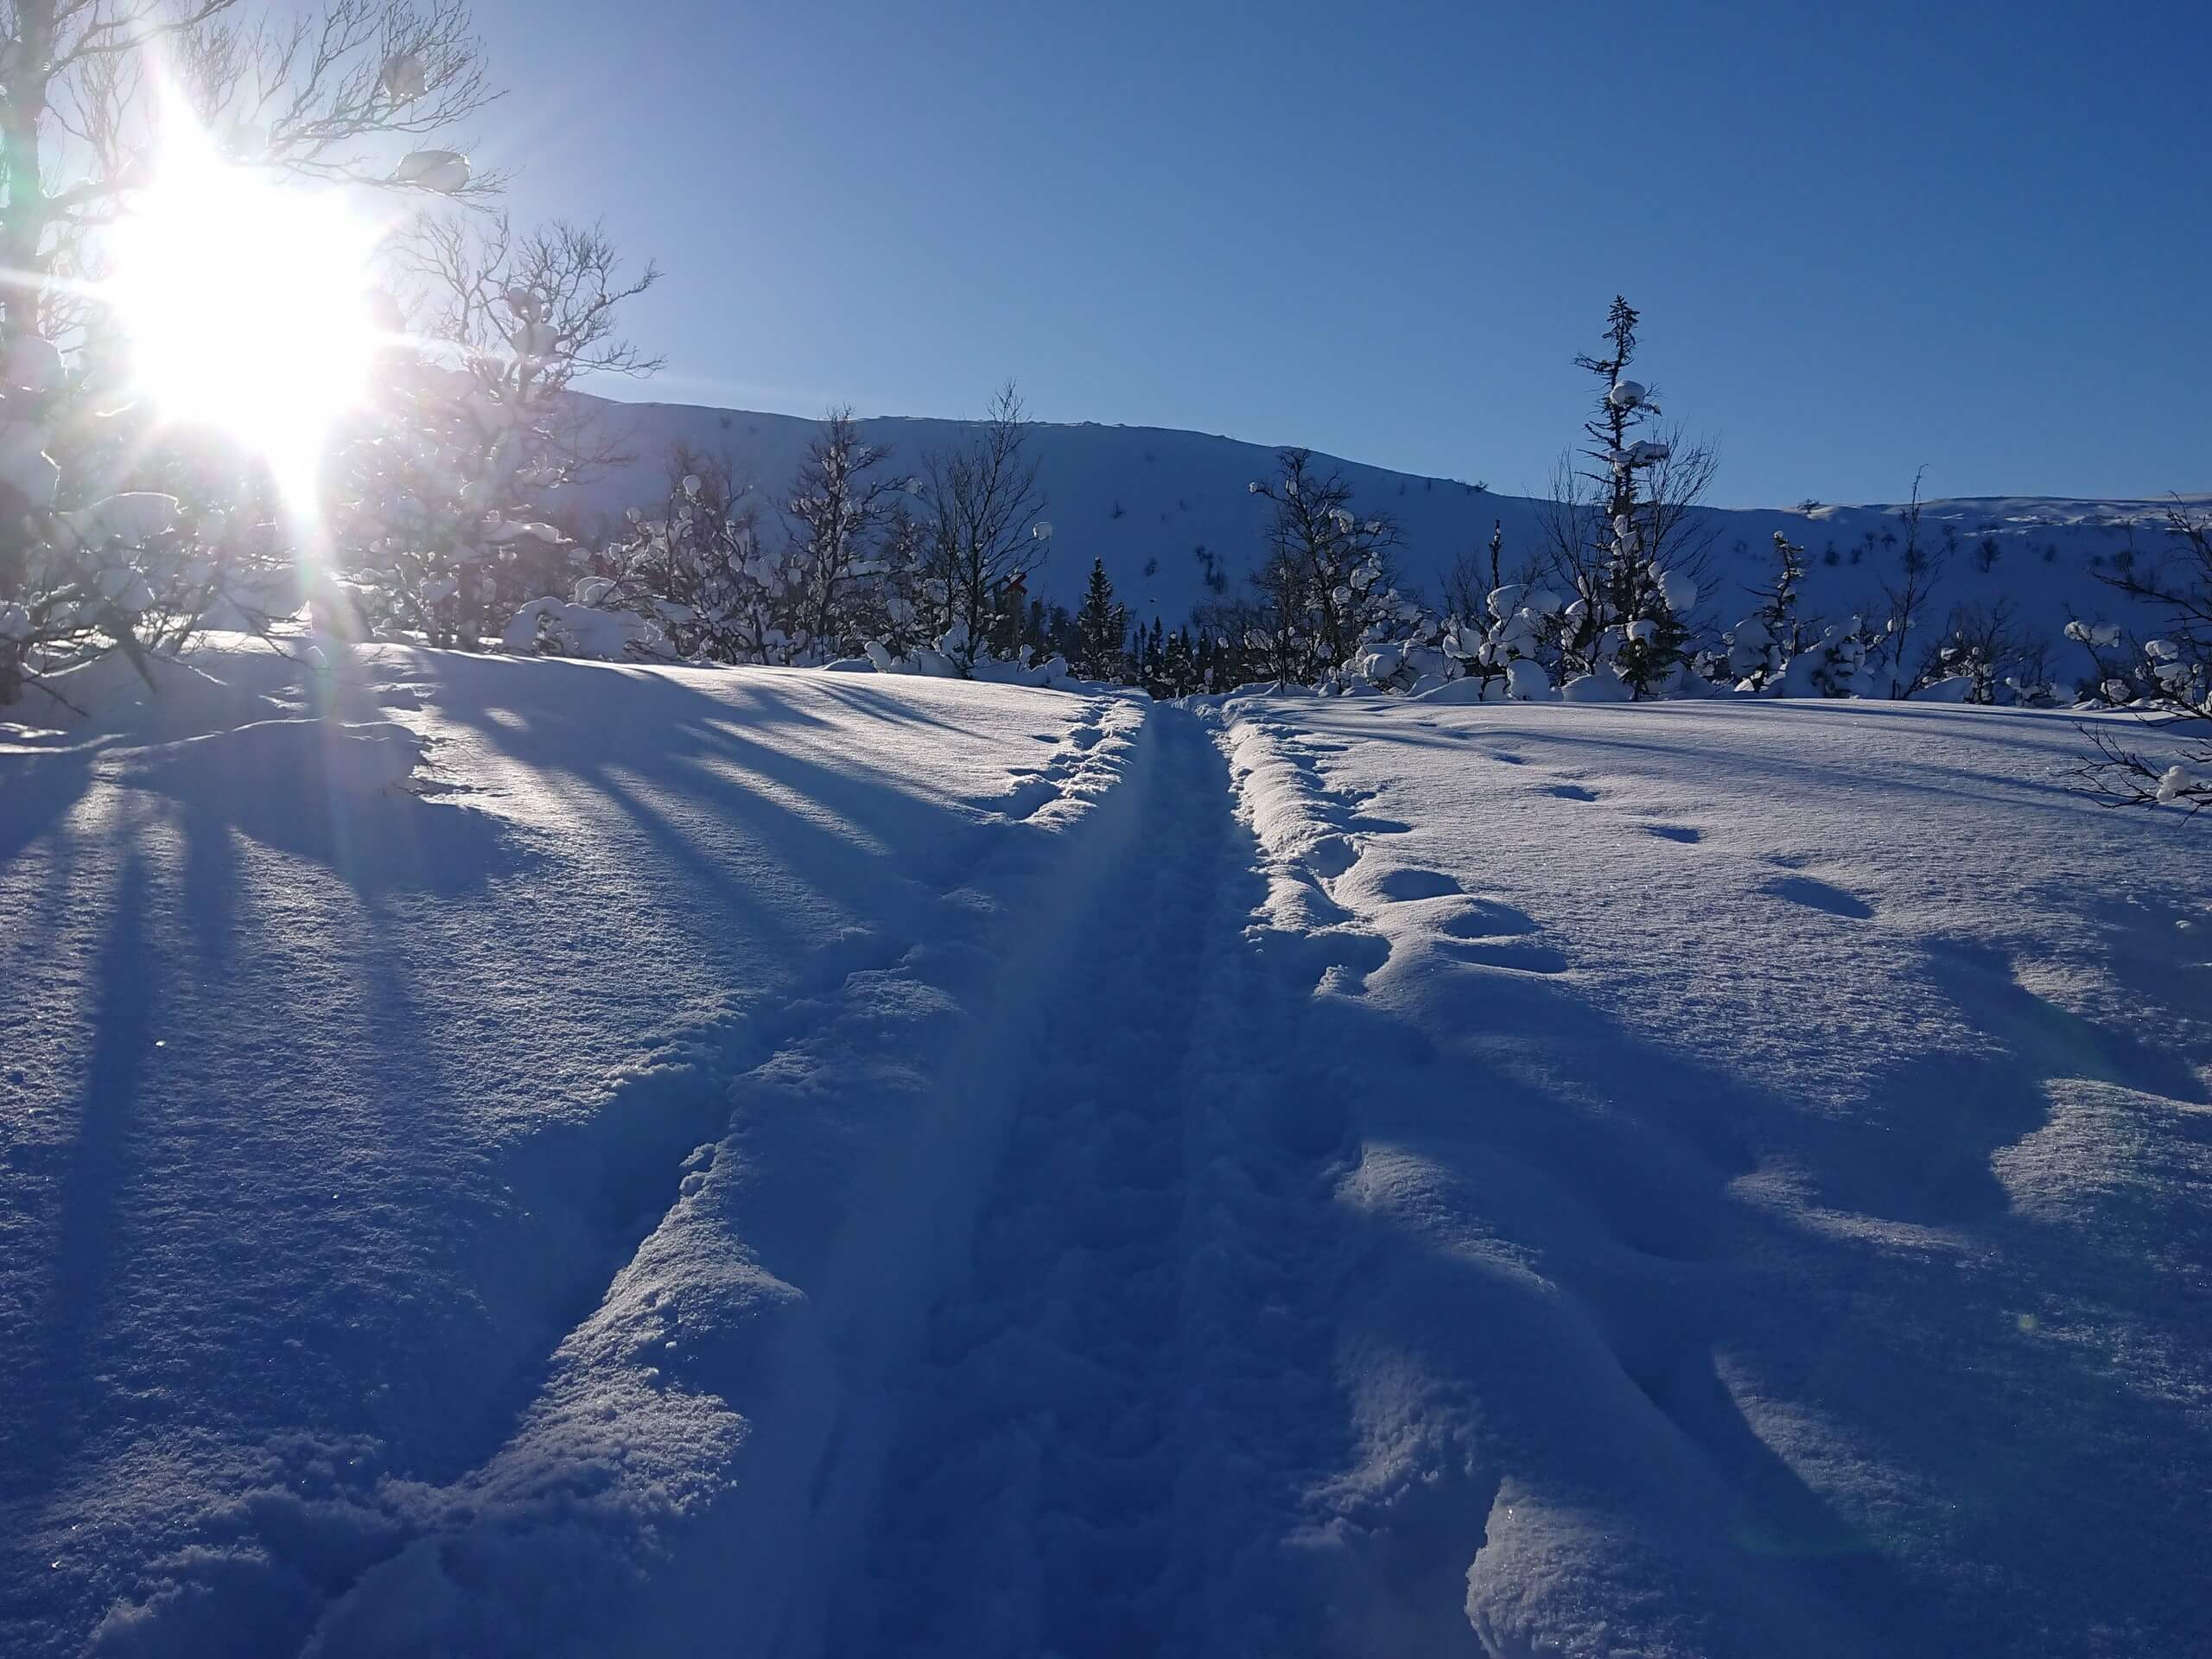 Sun reflecting on the snow in Åre Mountains